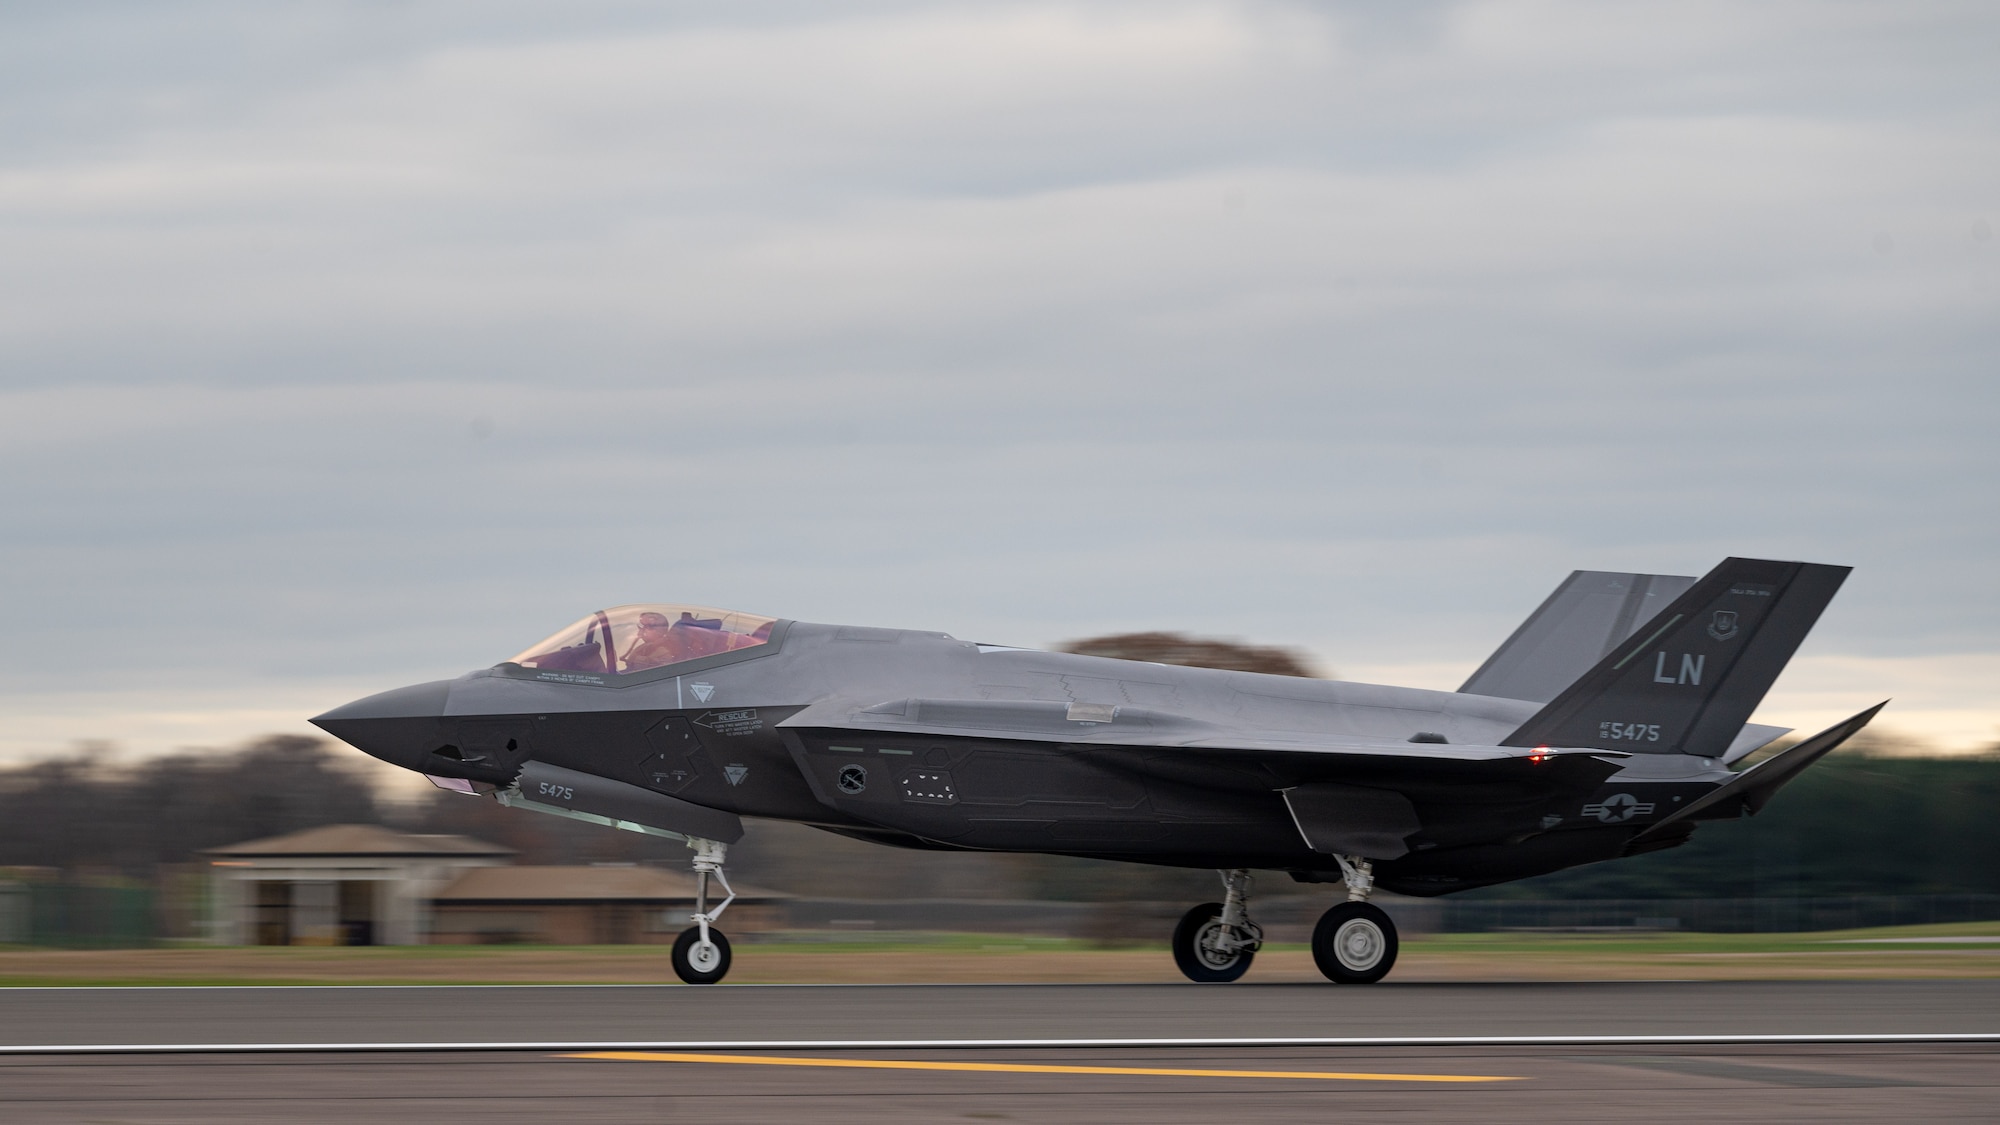 A U.S. Air Force F-35A Lightning II assigned to the 495th Fighter Squadron lands on the flightline at Royal Air Force Lakenheath, Dec. 15, 2021. The Liberty Wing was selected to host the first F-35 squadrons in Europe based on numerous factors, to include existing infrastructure, history with supporting fighter operations and the combined training opportunities the UK has to offer. (U.S. Air Force photo by Senior Airman Koby I. Saunders)